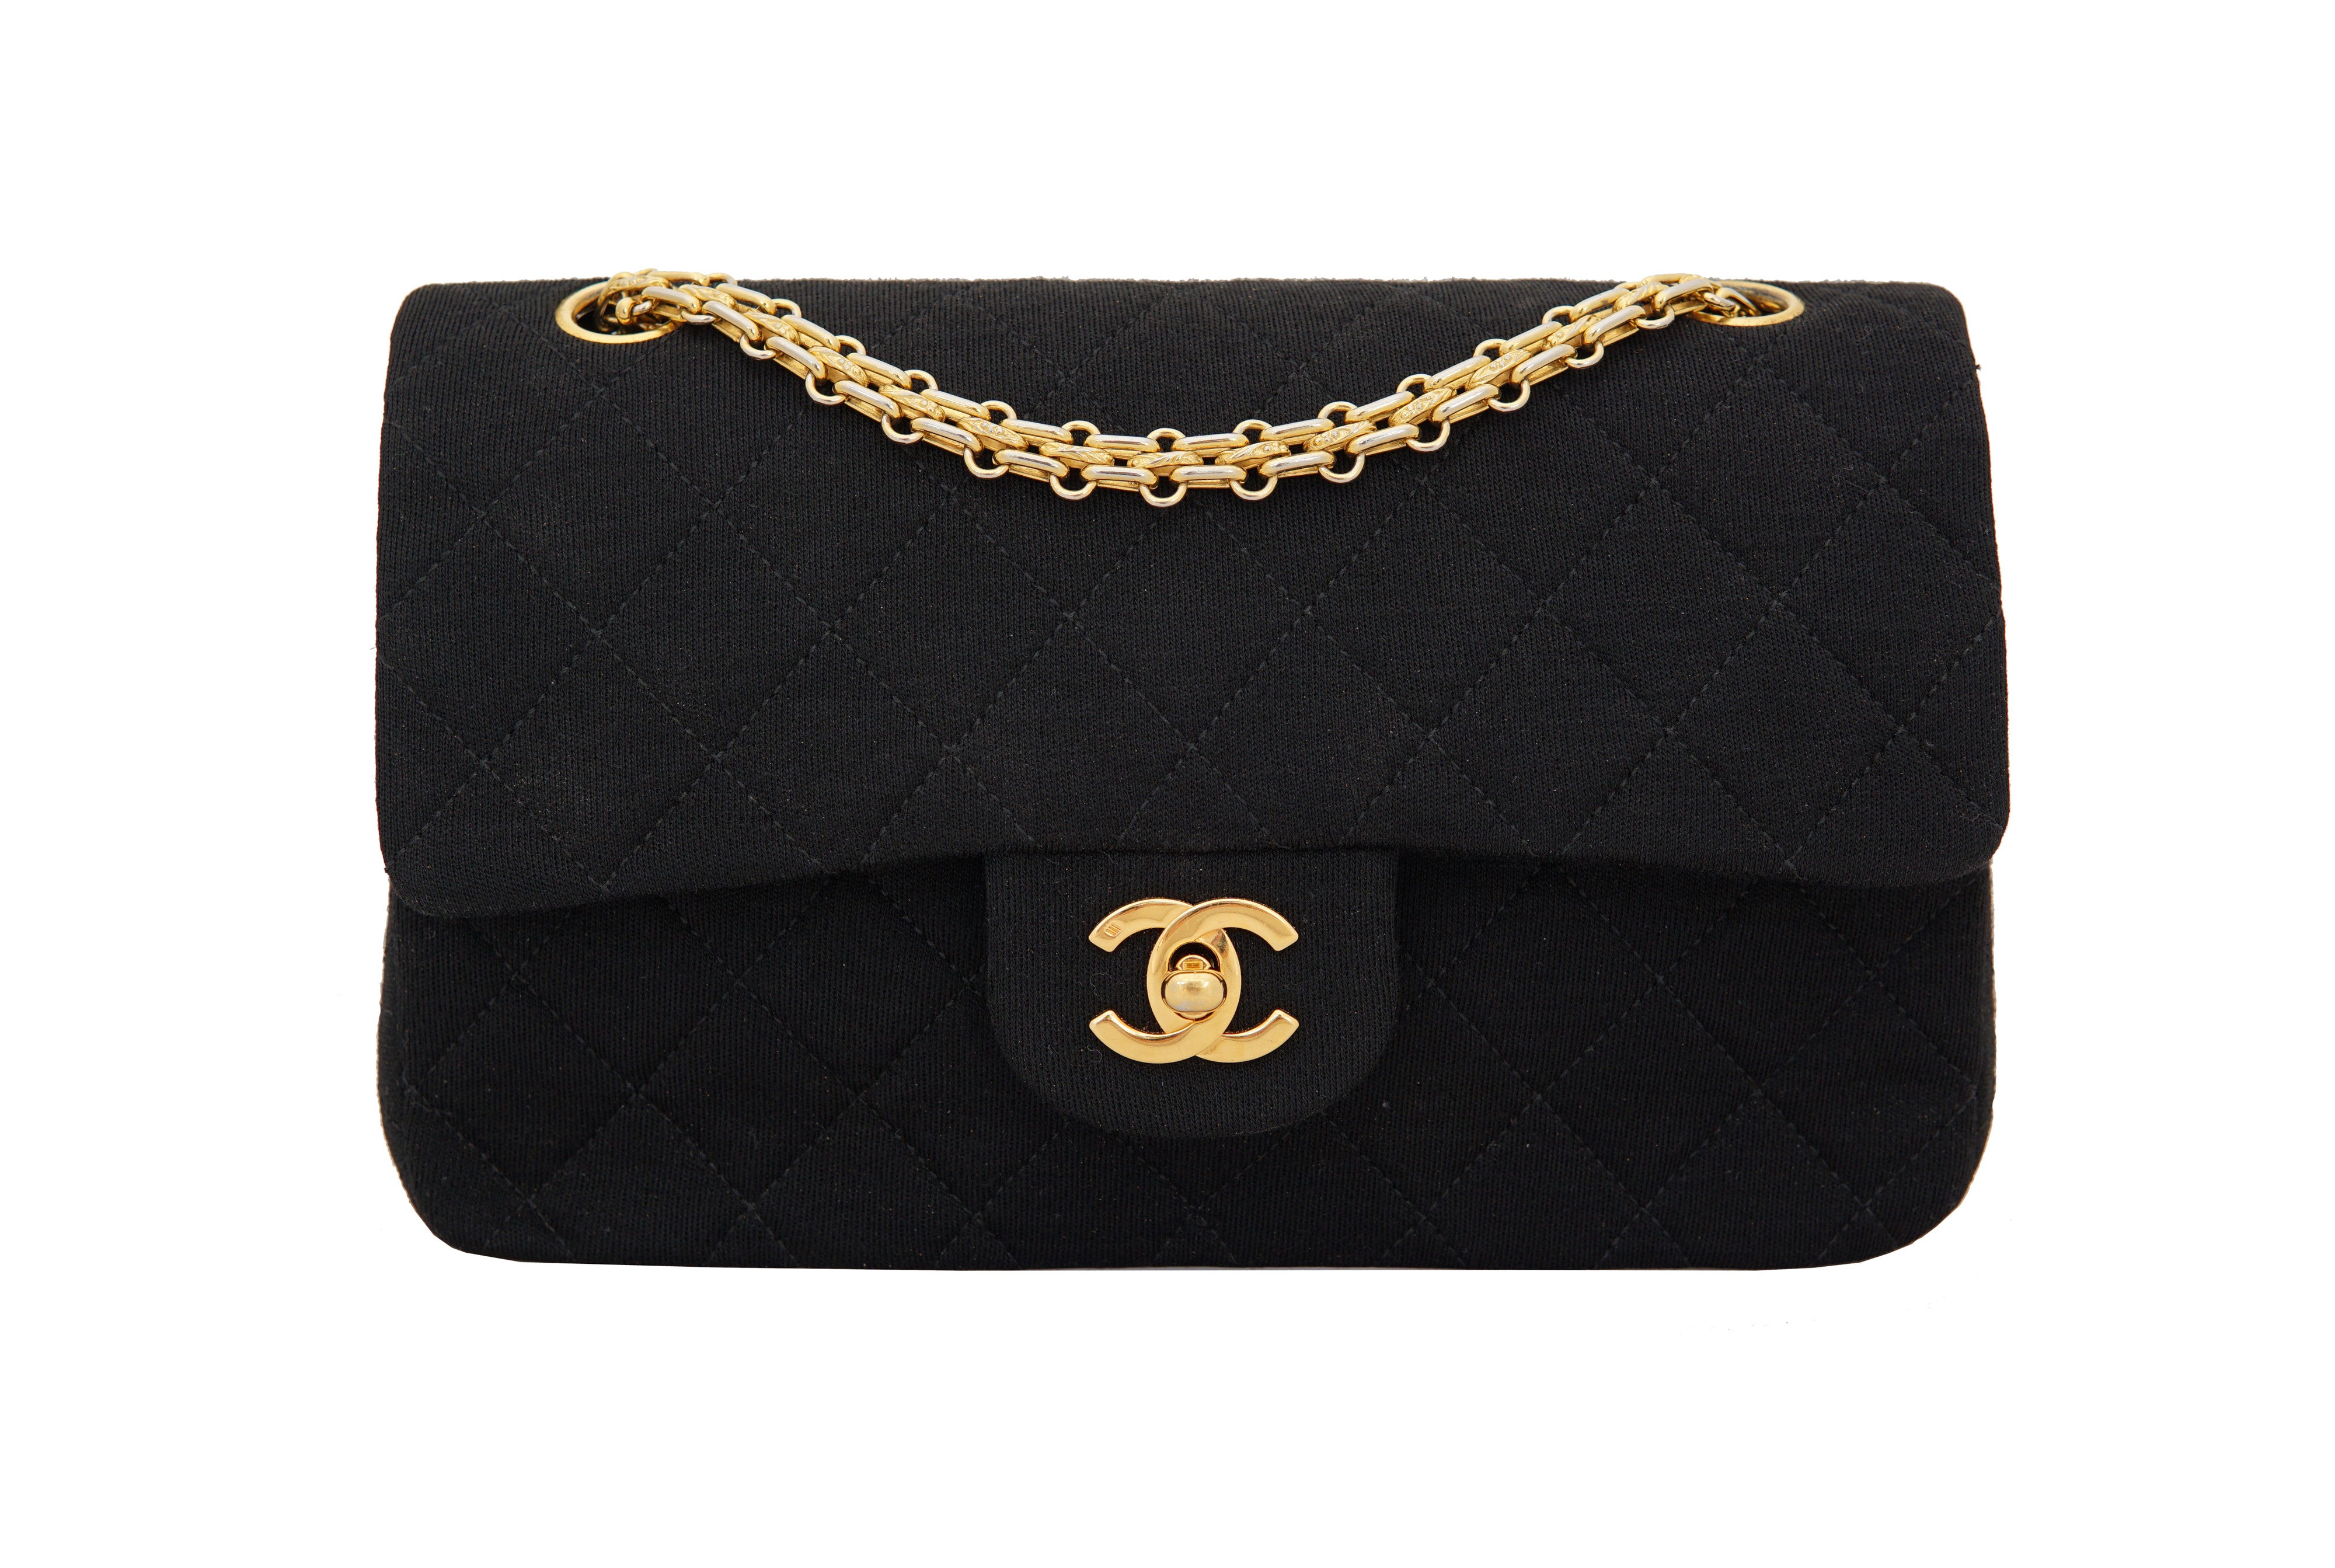 CHANEL VINTAGE 2.55 BAG - Classic Quilted Jersey in Black - Vintage District